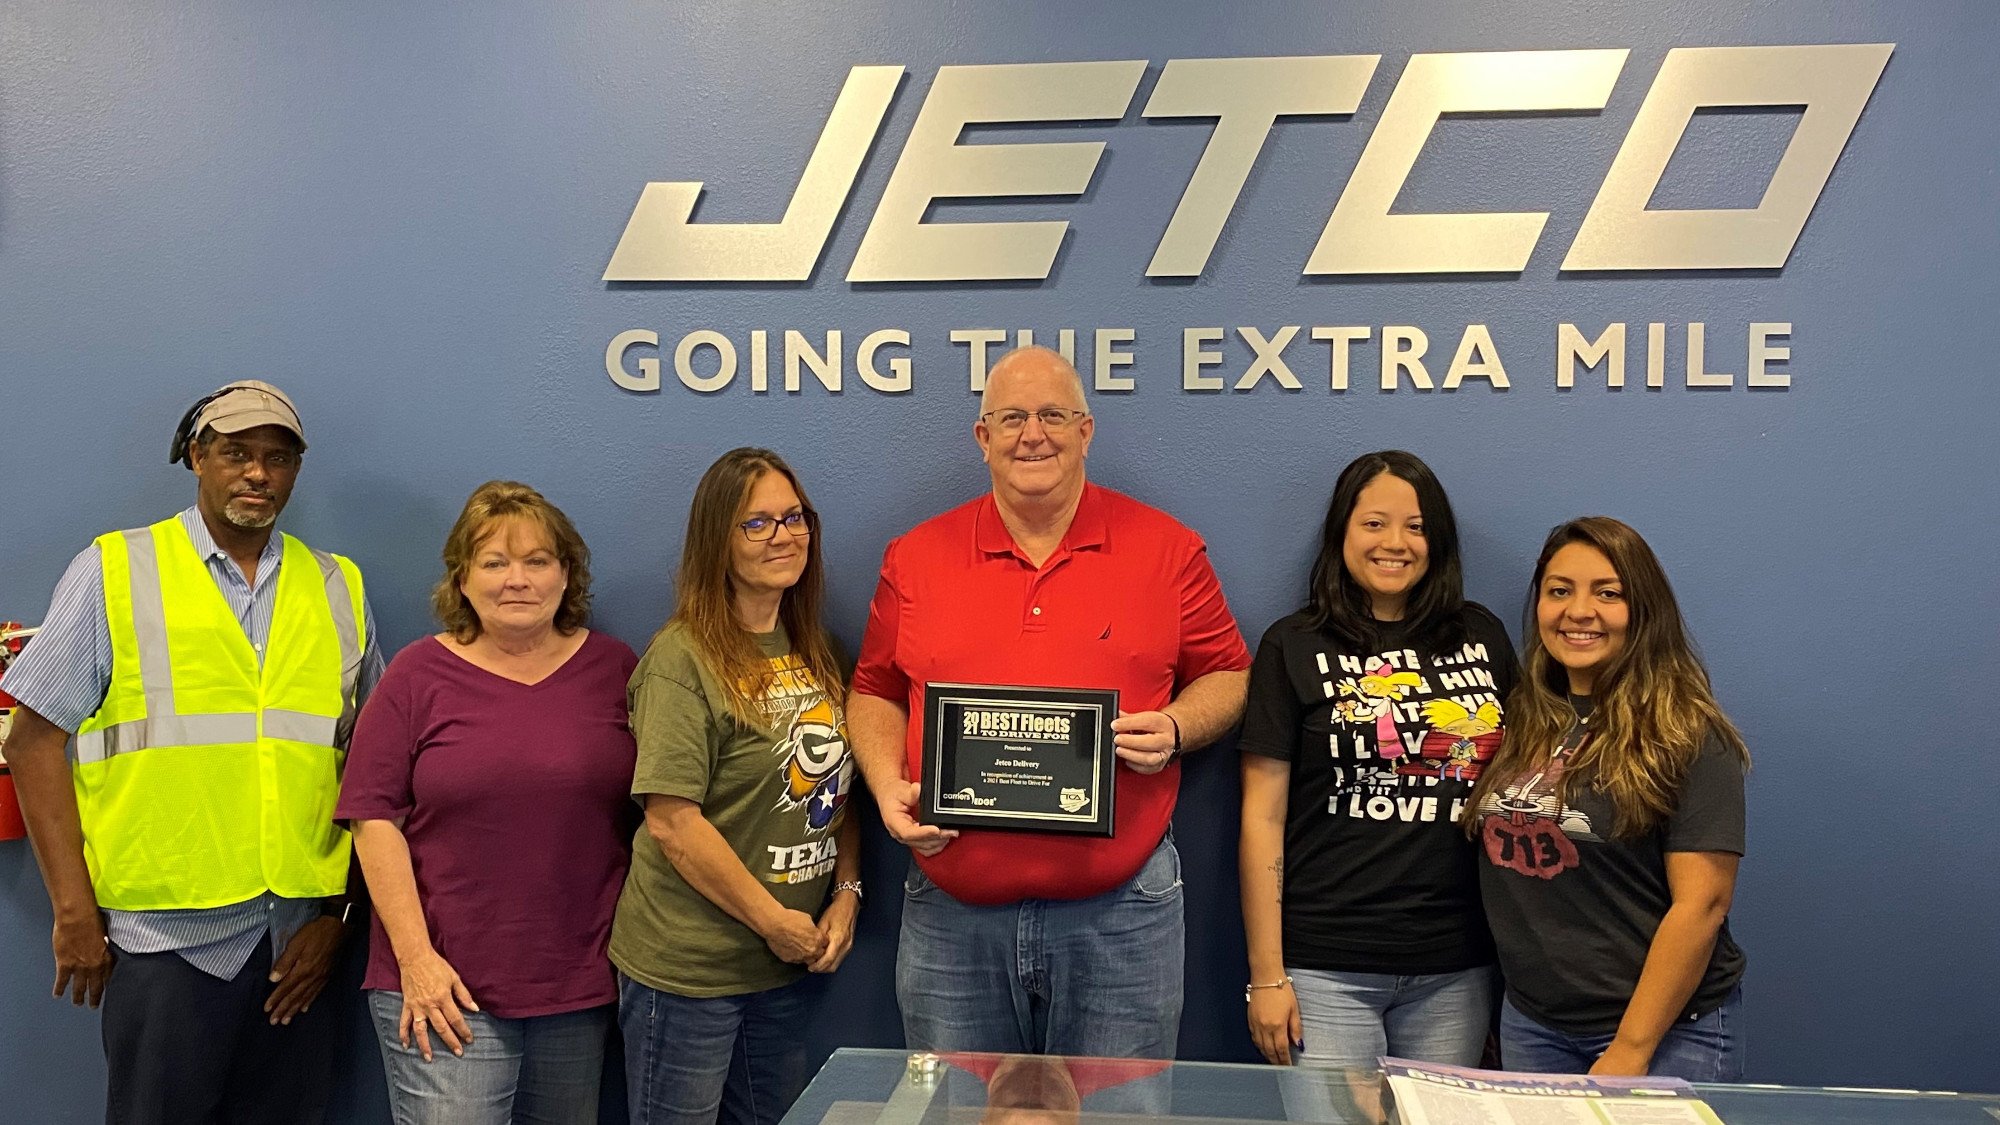 FreightWaves Highlights Jetco As A Best Fleet To Drive For